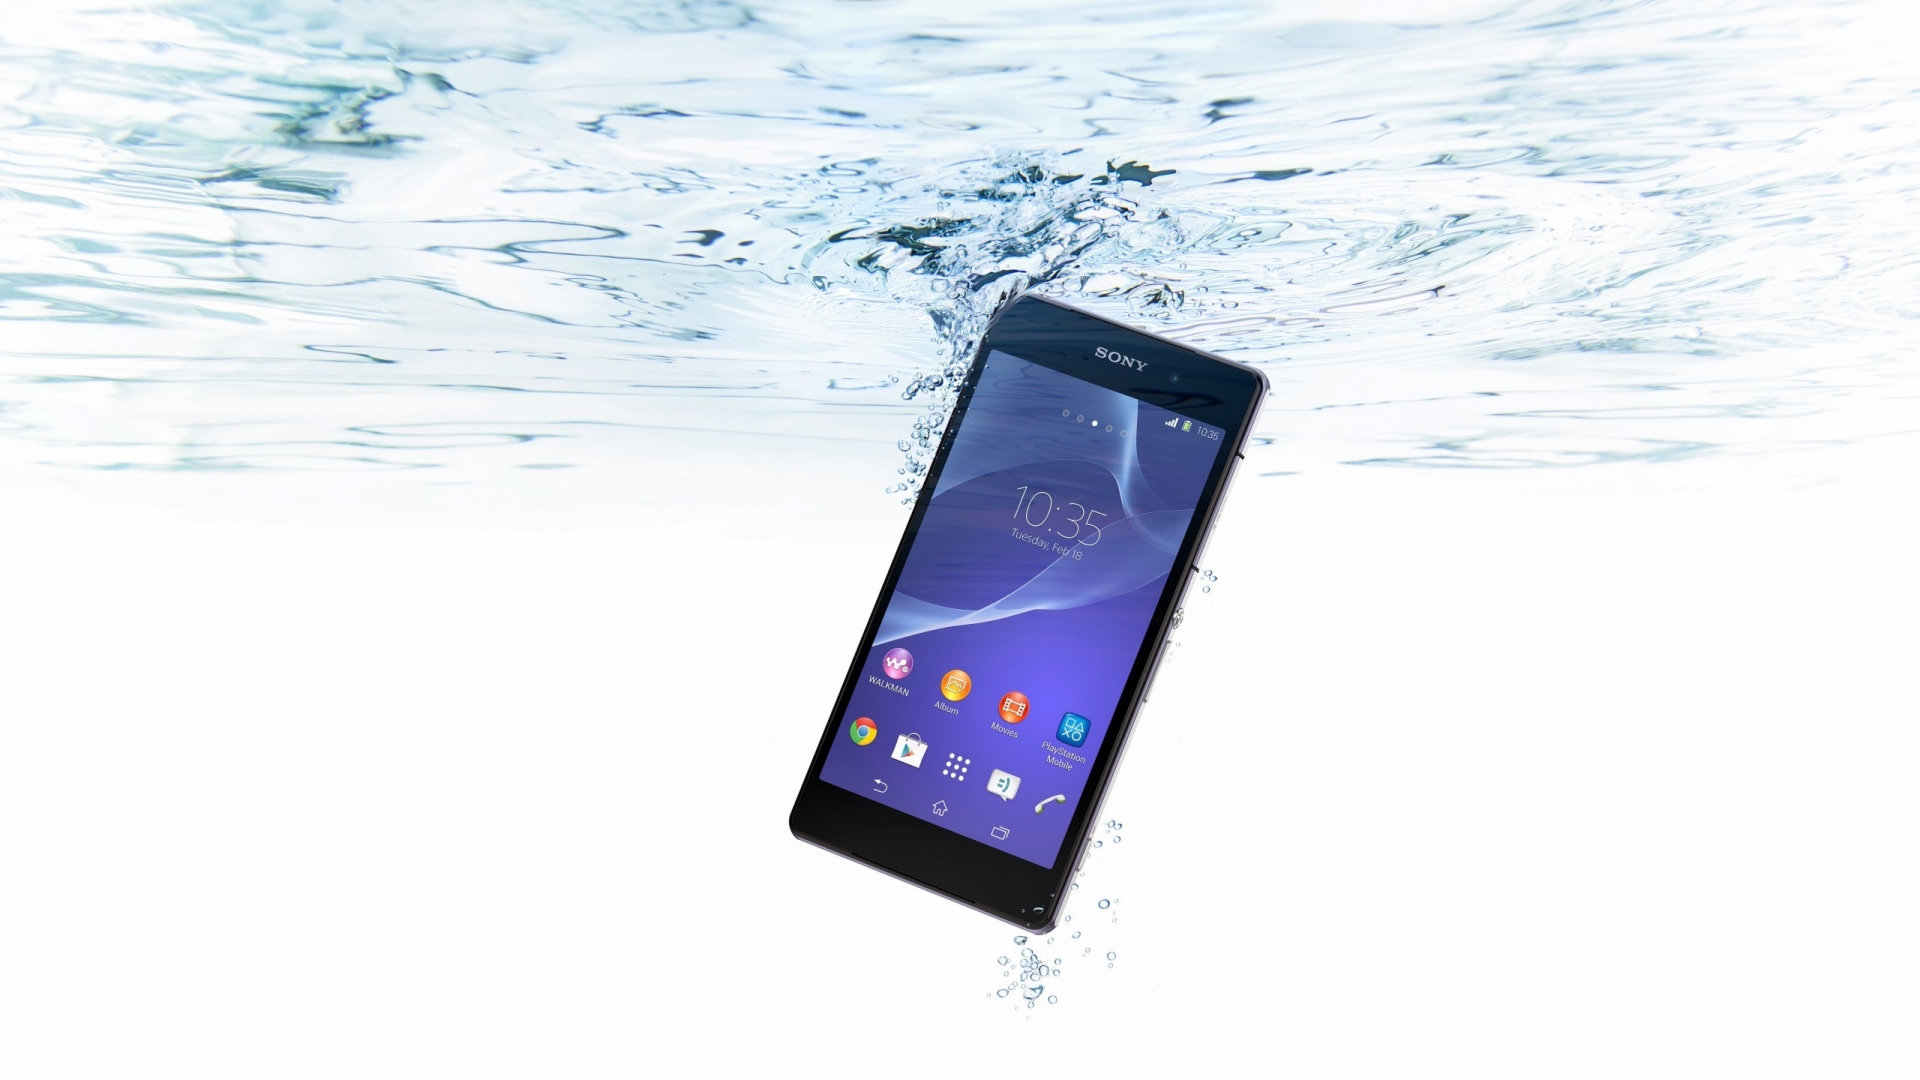 Sony Xperia Z2 Waterproof for 1920 x 1080 HDTV 1080p resolution